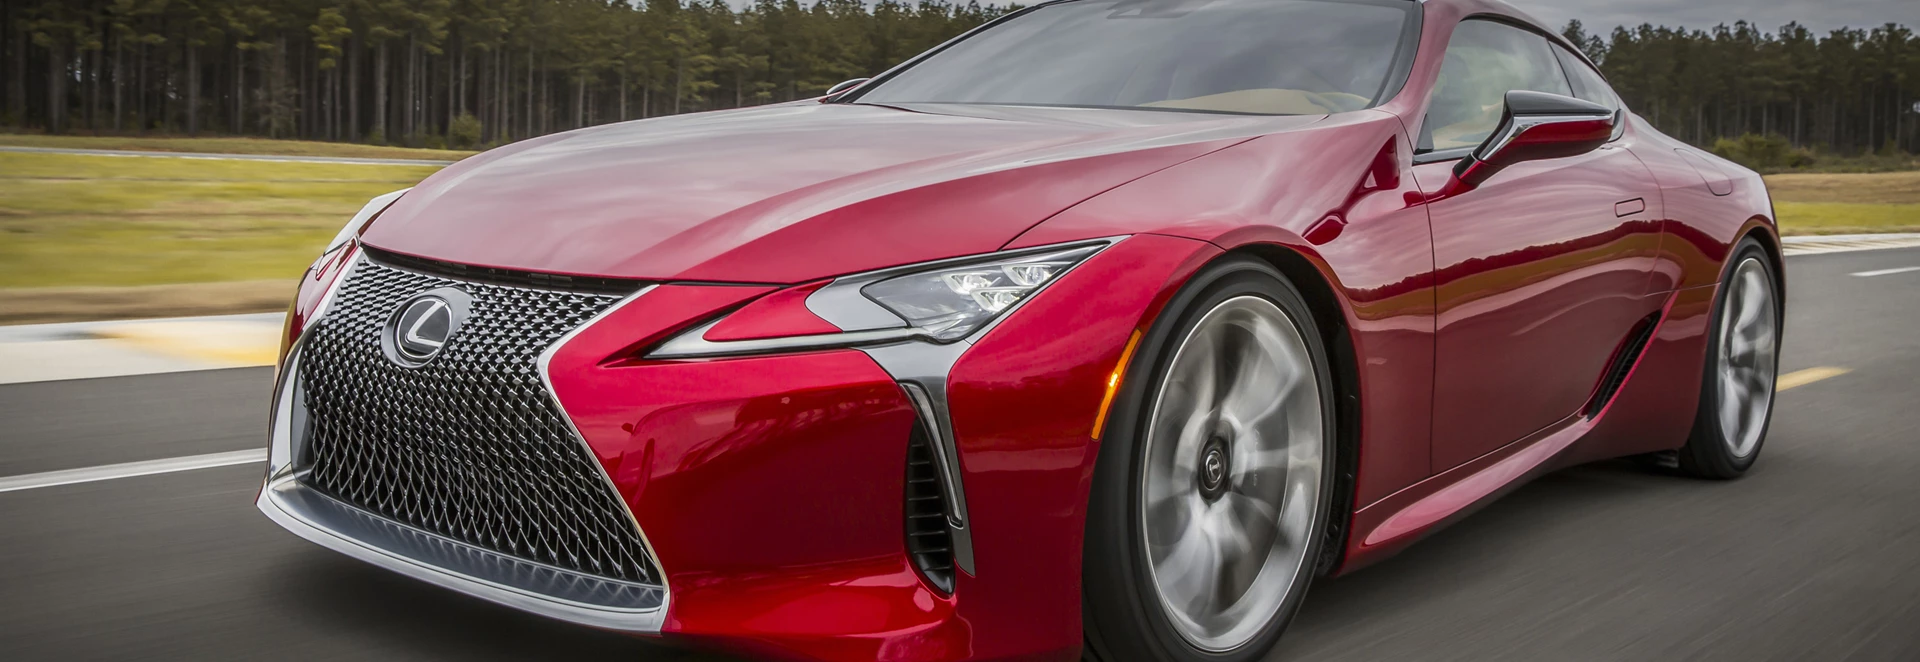 Lexus LC 500 coupe pricing confirmed 